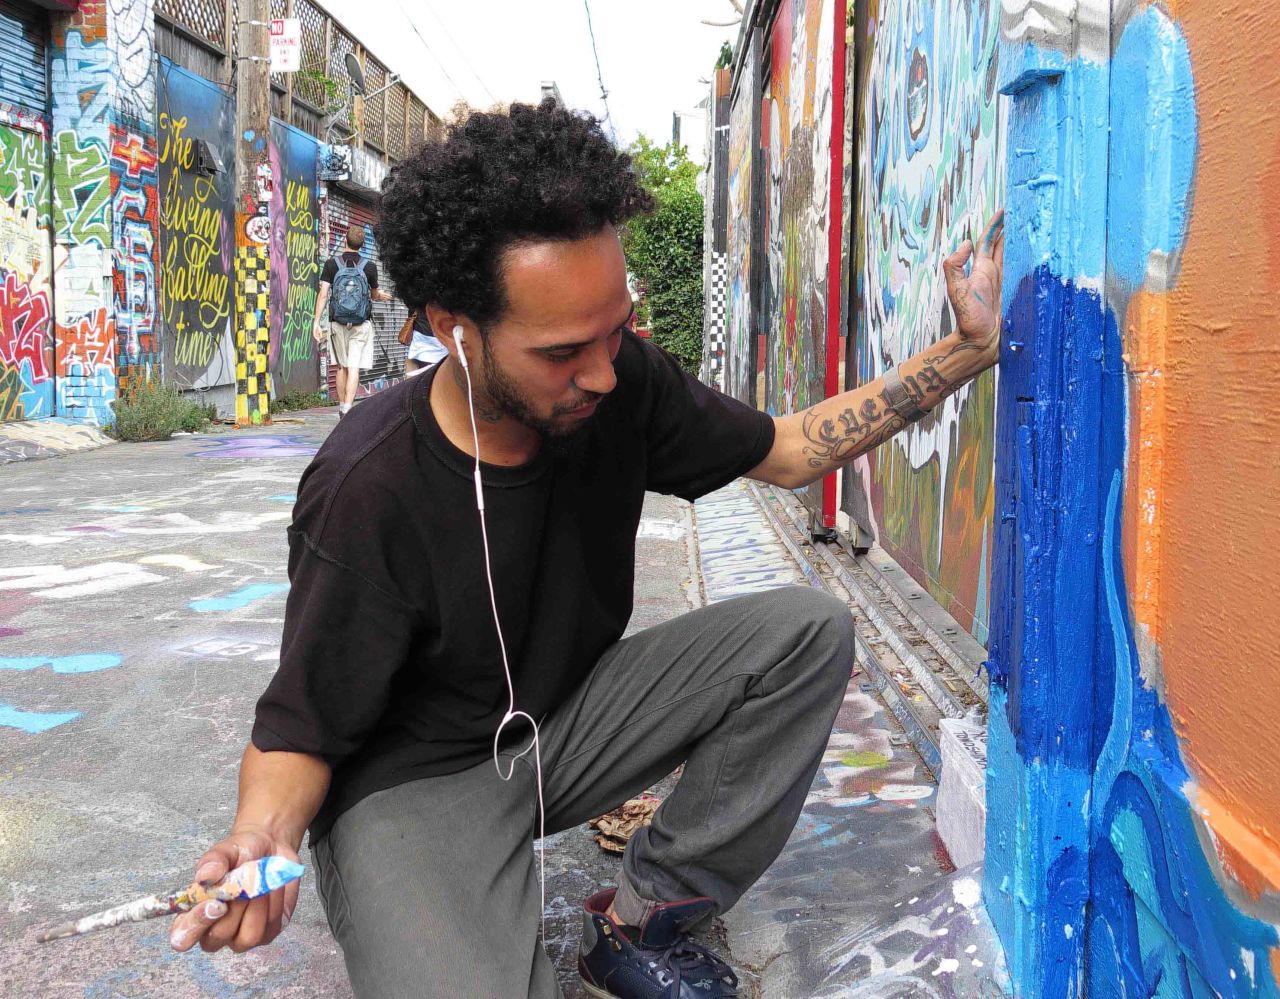 Carlos Daniel Perez-Boza teaches art at San Francisco's Cultural Arts Division of the Recreation and Parks. Here he works on an authorized mural in Clarion Alley in the Mission District.